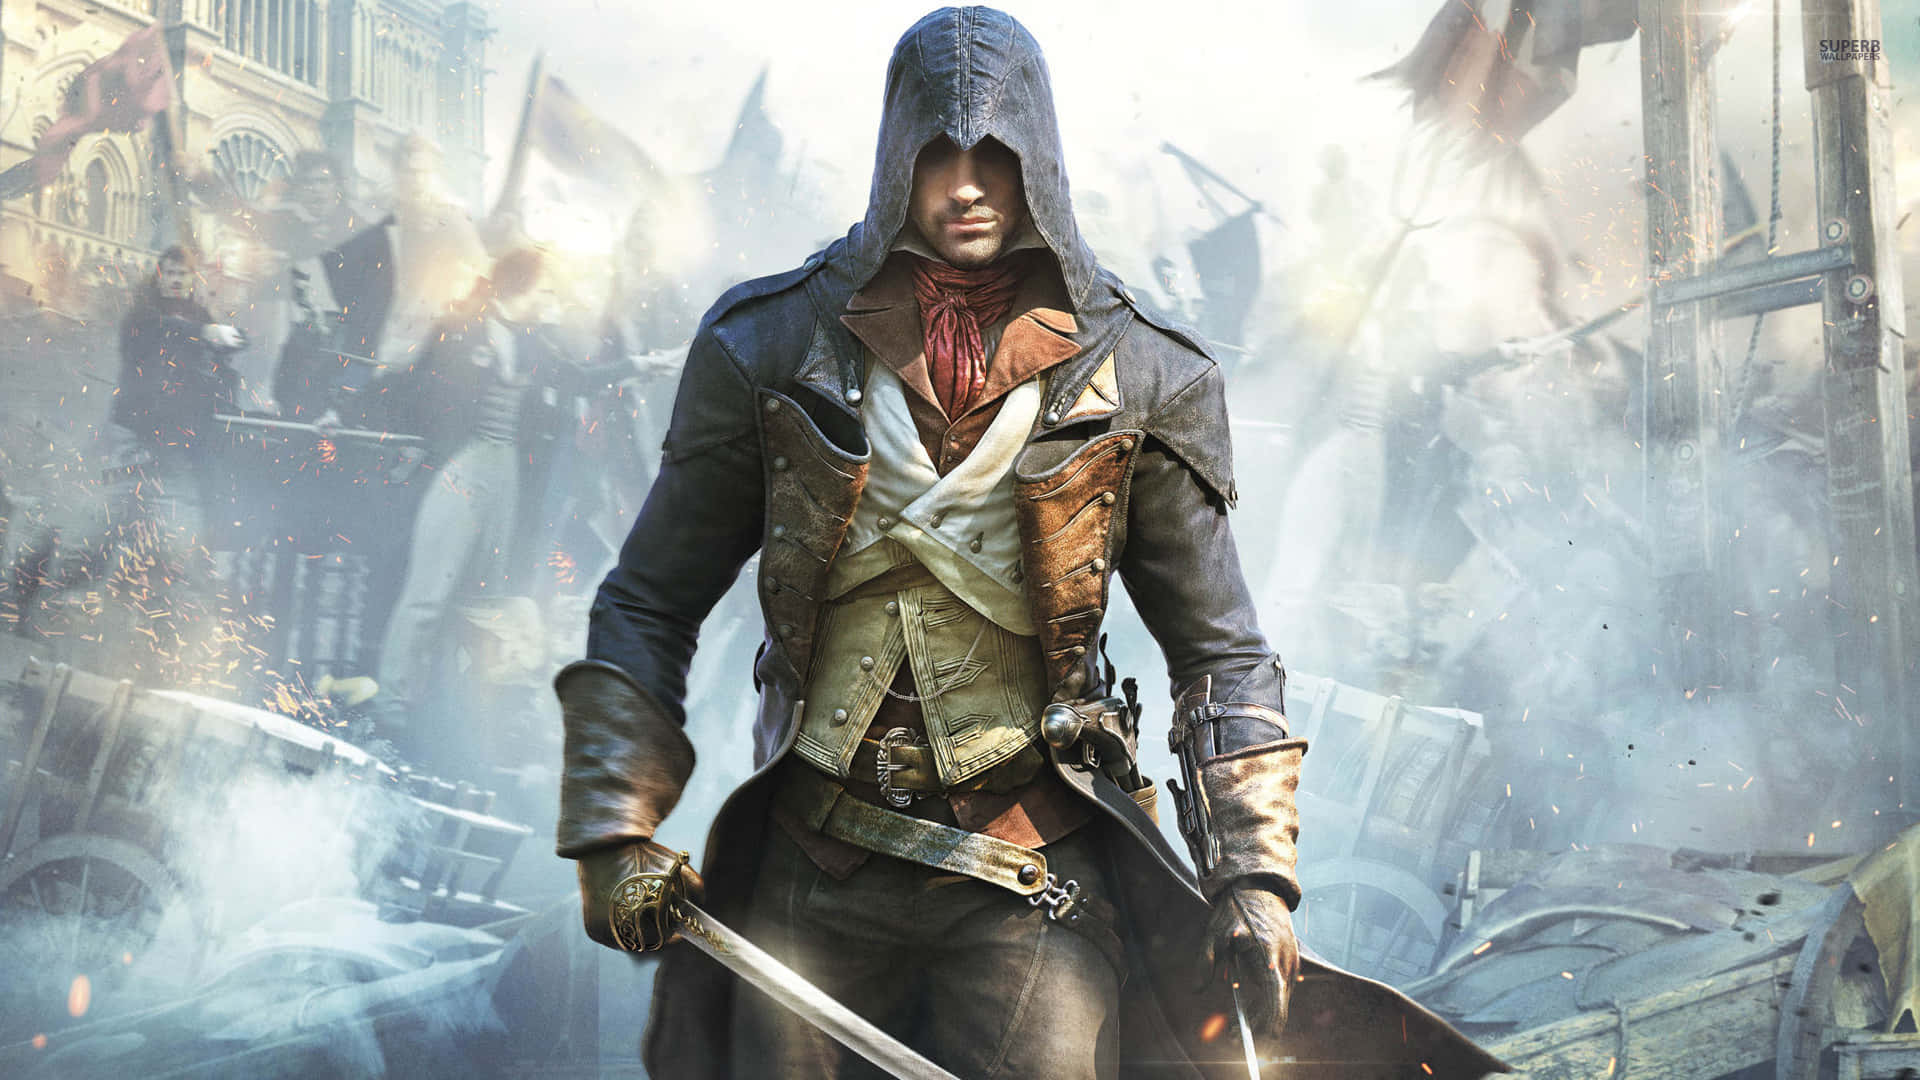 Assassin's Creed Unity Hero in Action Wallpaper